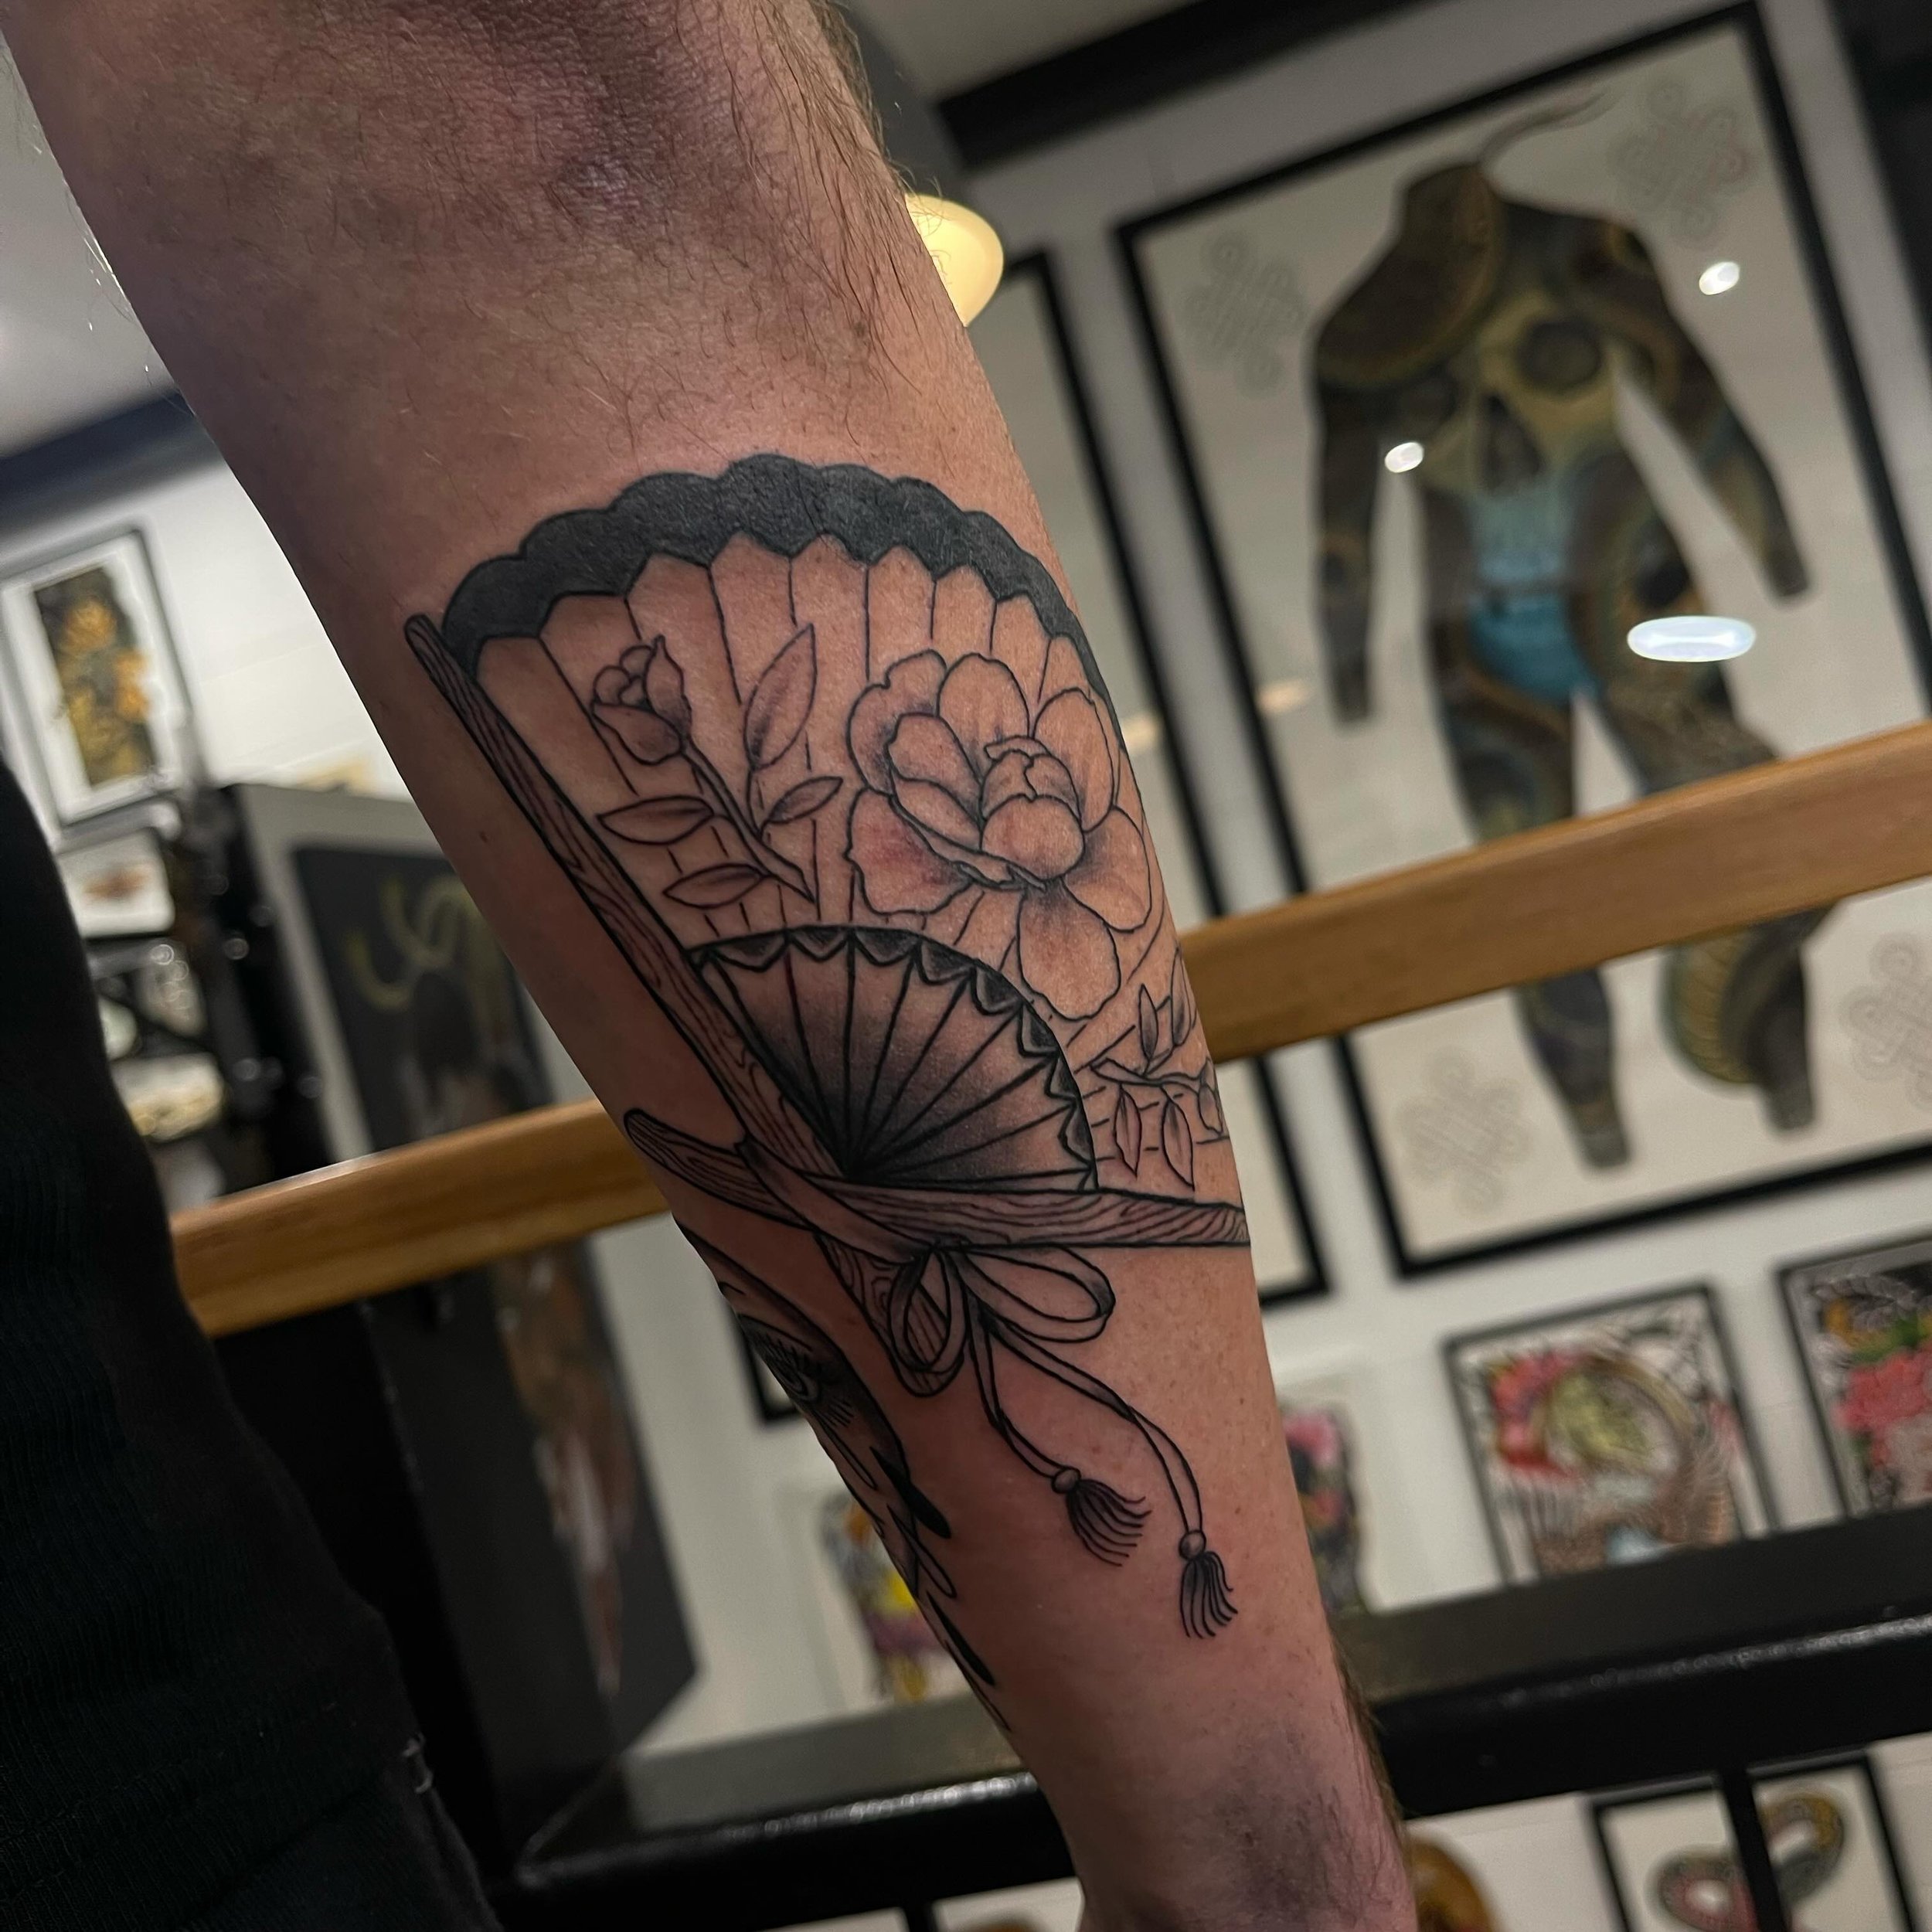 Gorgeous fan on the arm by Tayla @tbd_tattoo 
To get in contact with Tayla, please message directly or book via the shop Instagram or website. 
&bull;
&bull;
&bull;
&bull;
&bull;
#new #fyp #tradtattoo #goldcoast #goldcoasttattoo #visitgoldcoast #tatt